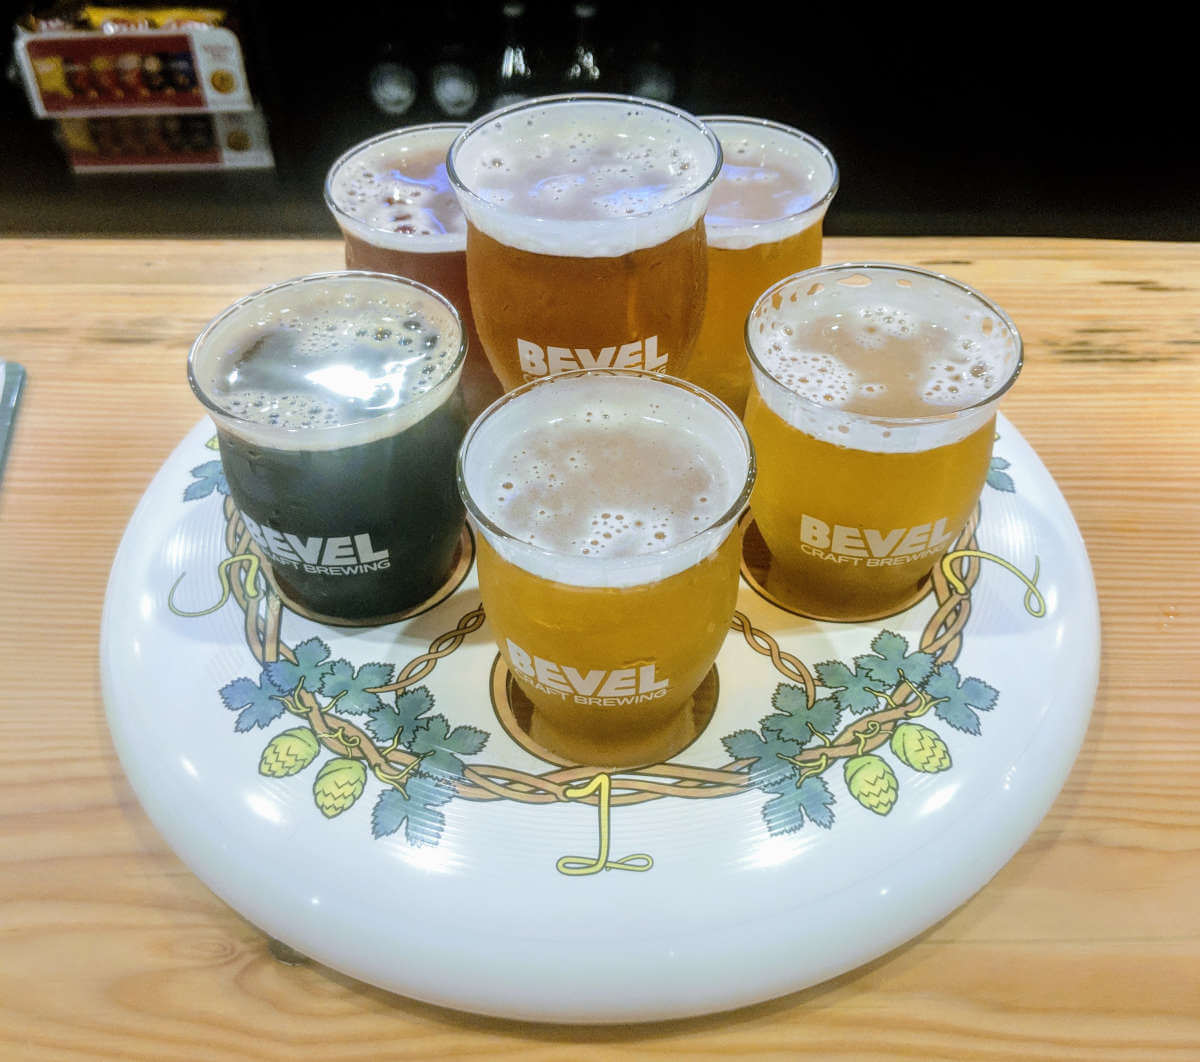 Bevel Craft Brewing is open! With grand opening party this Saturday, 4/6